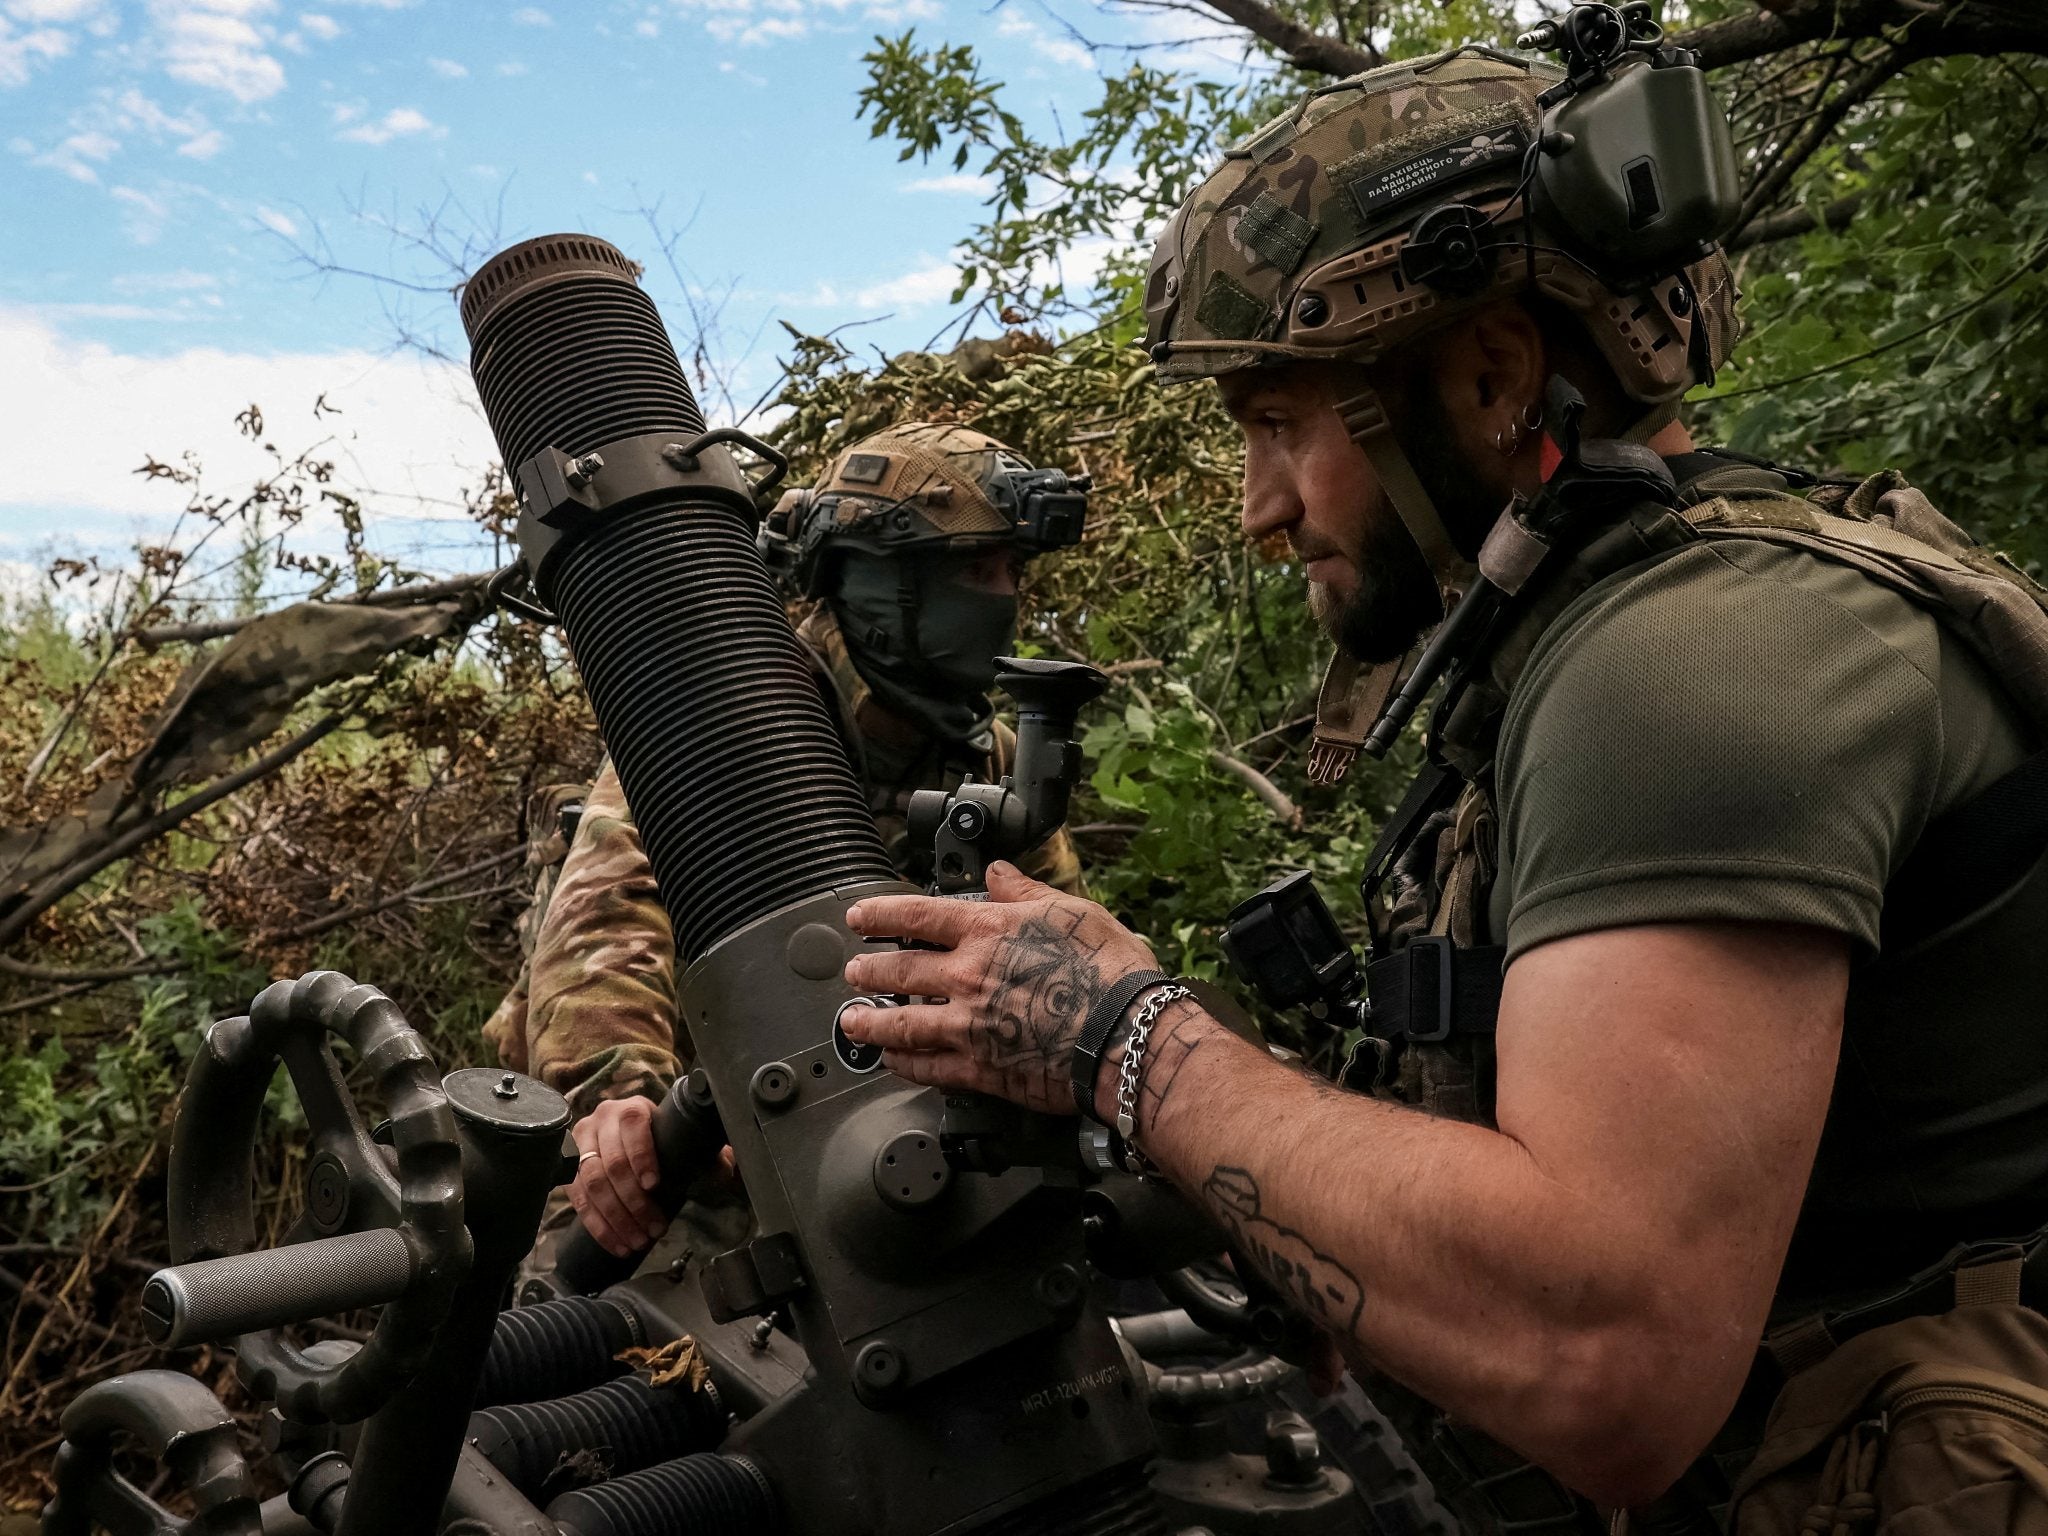 Ukrainian forces prepare to fire a mortar towards Russian positions on the front line near Bakhmut